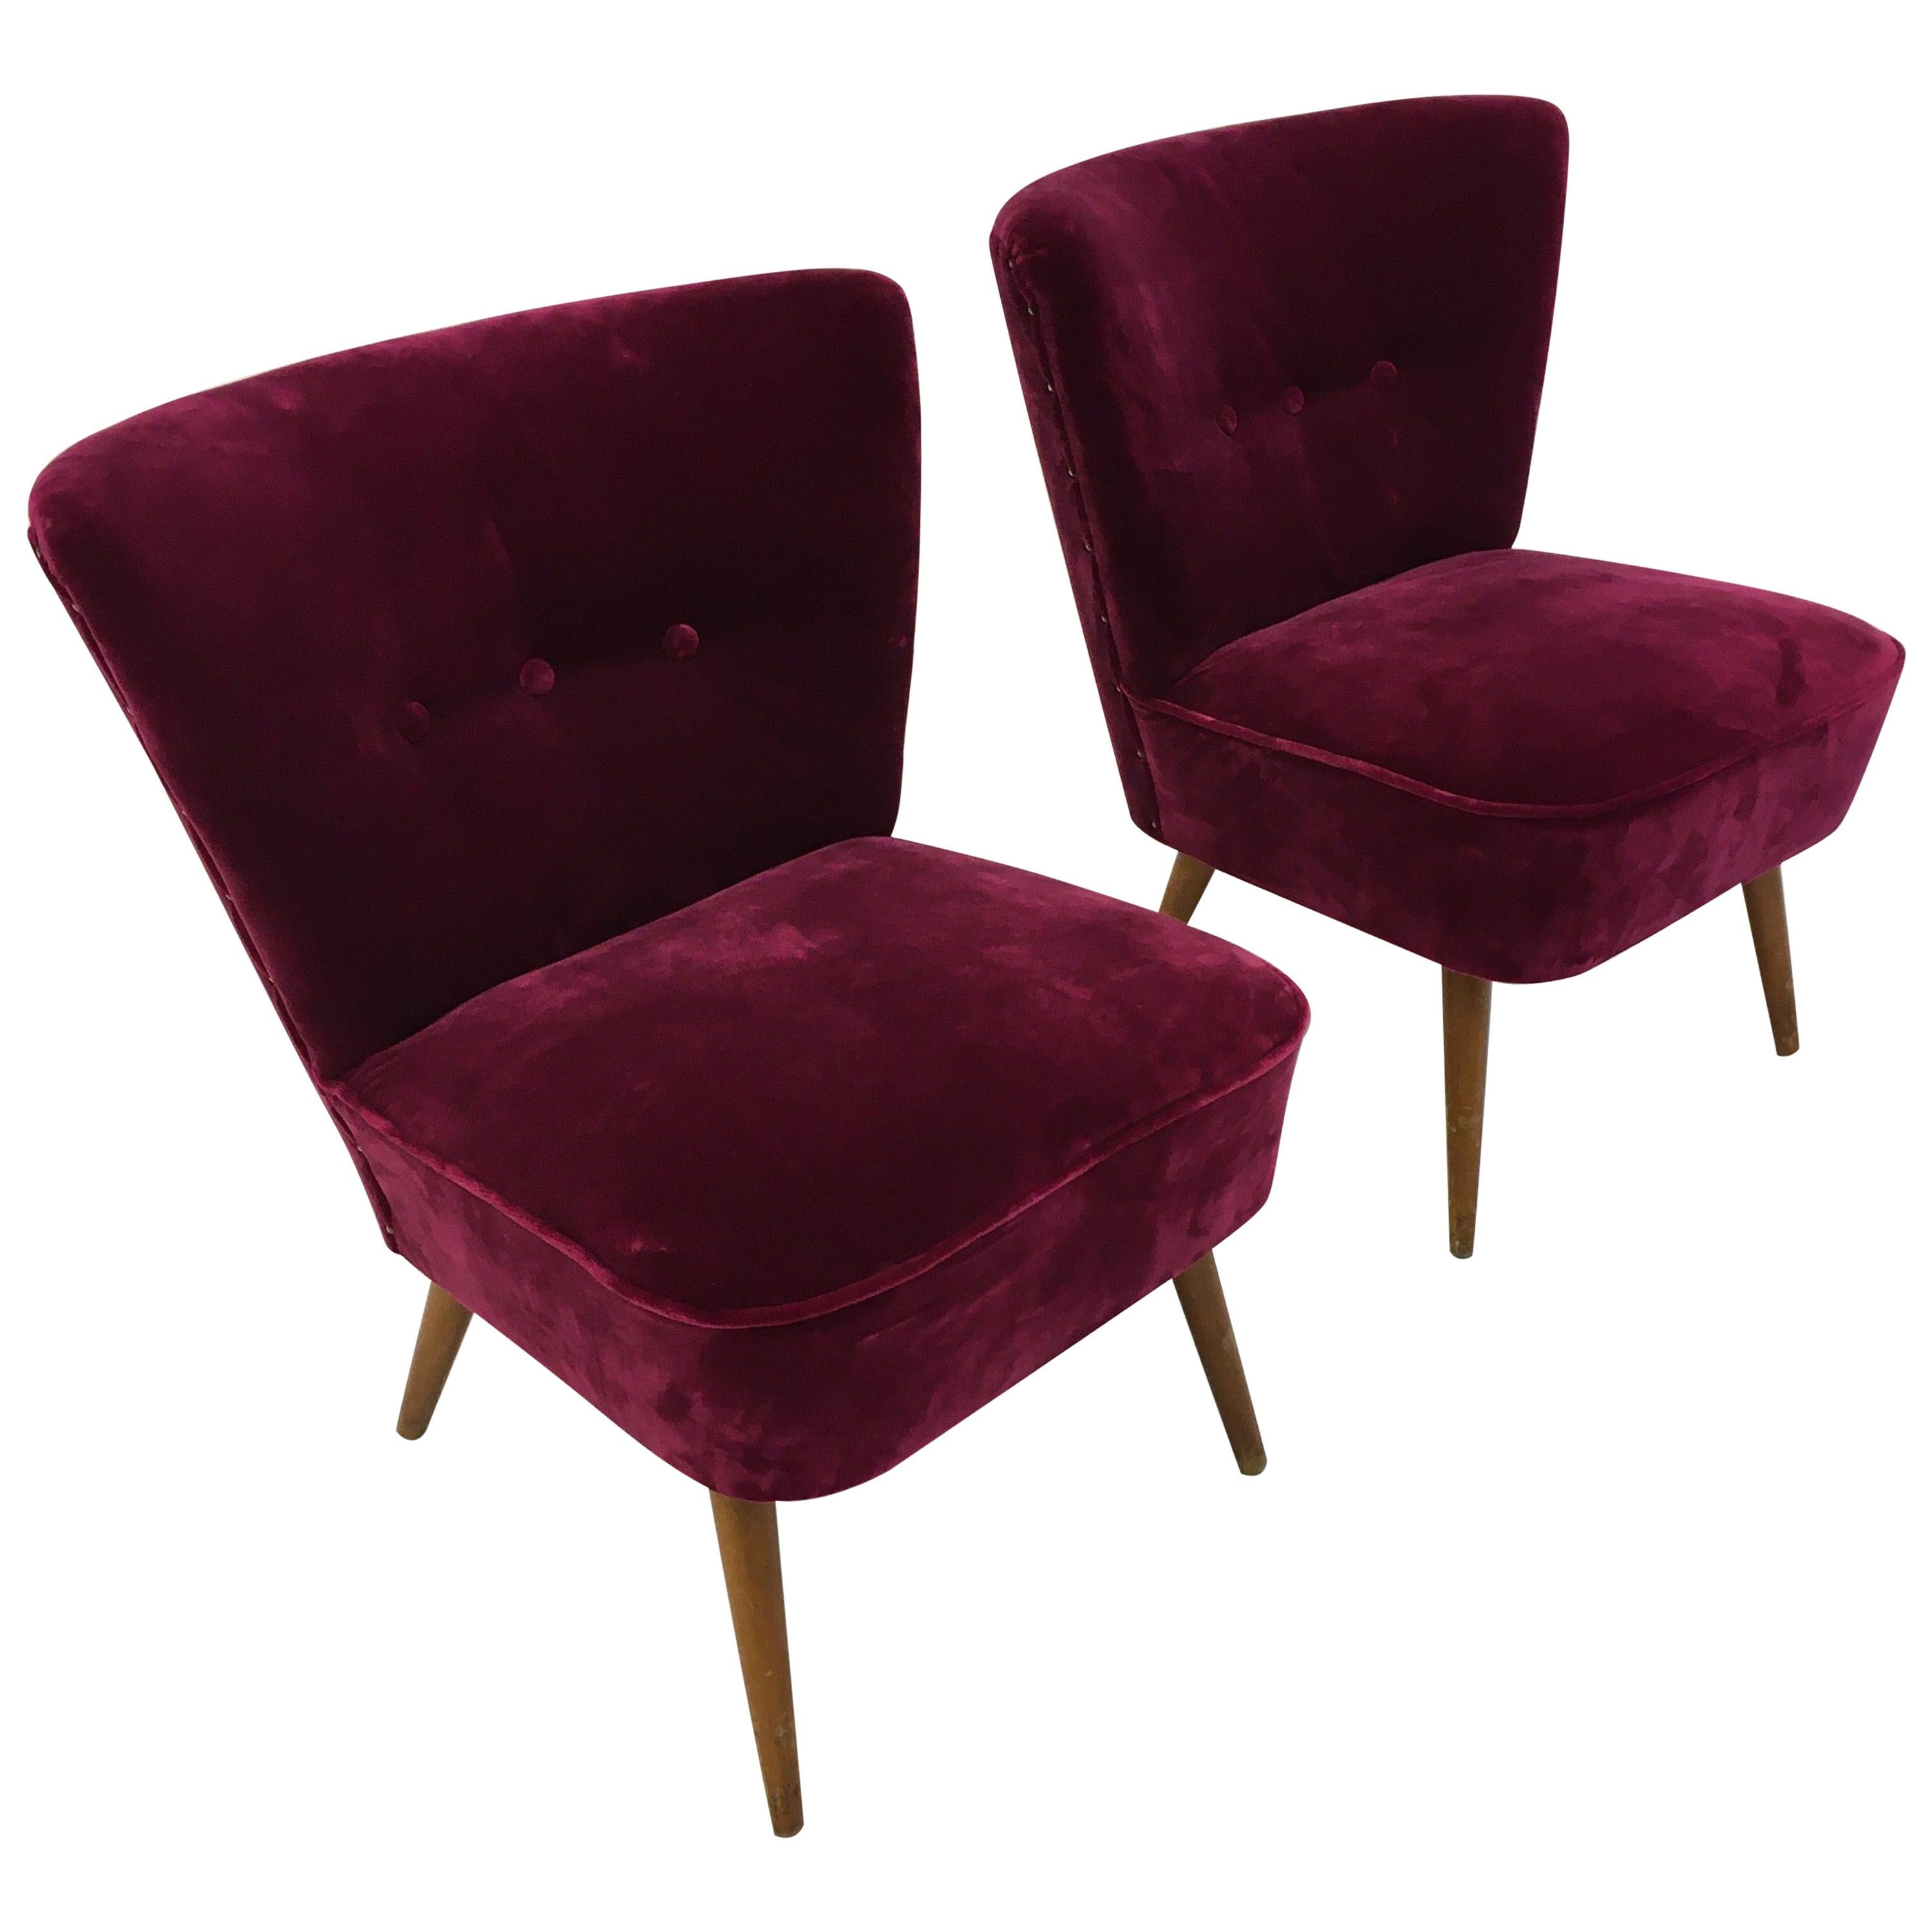 Mid-Century Modern Cocktail Chairs, France, 1950s For Sale